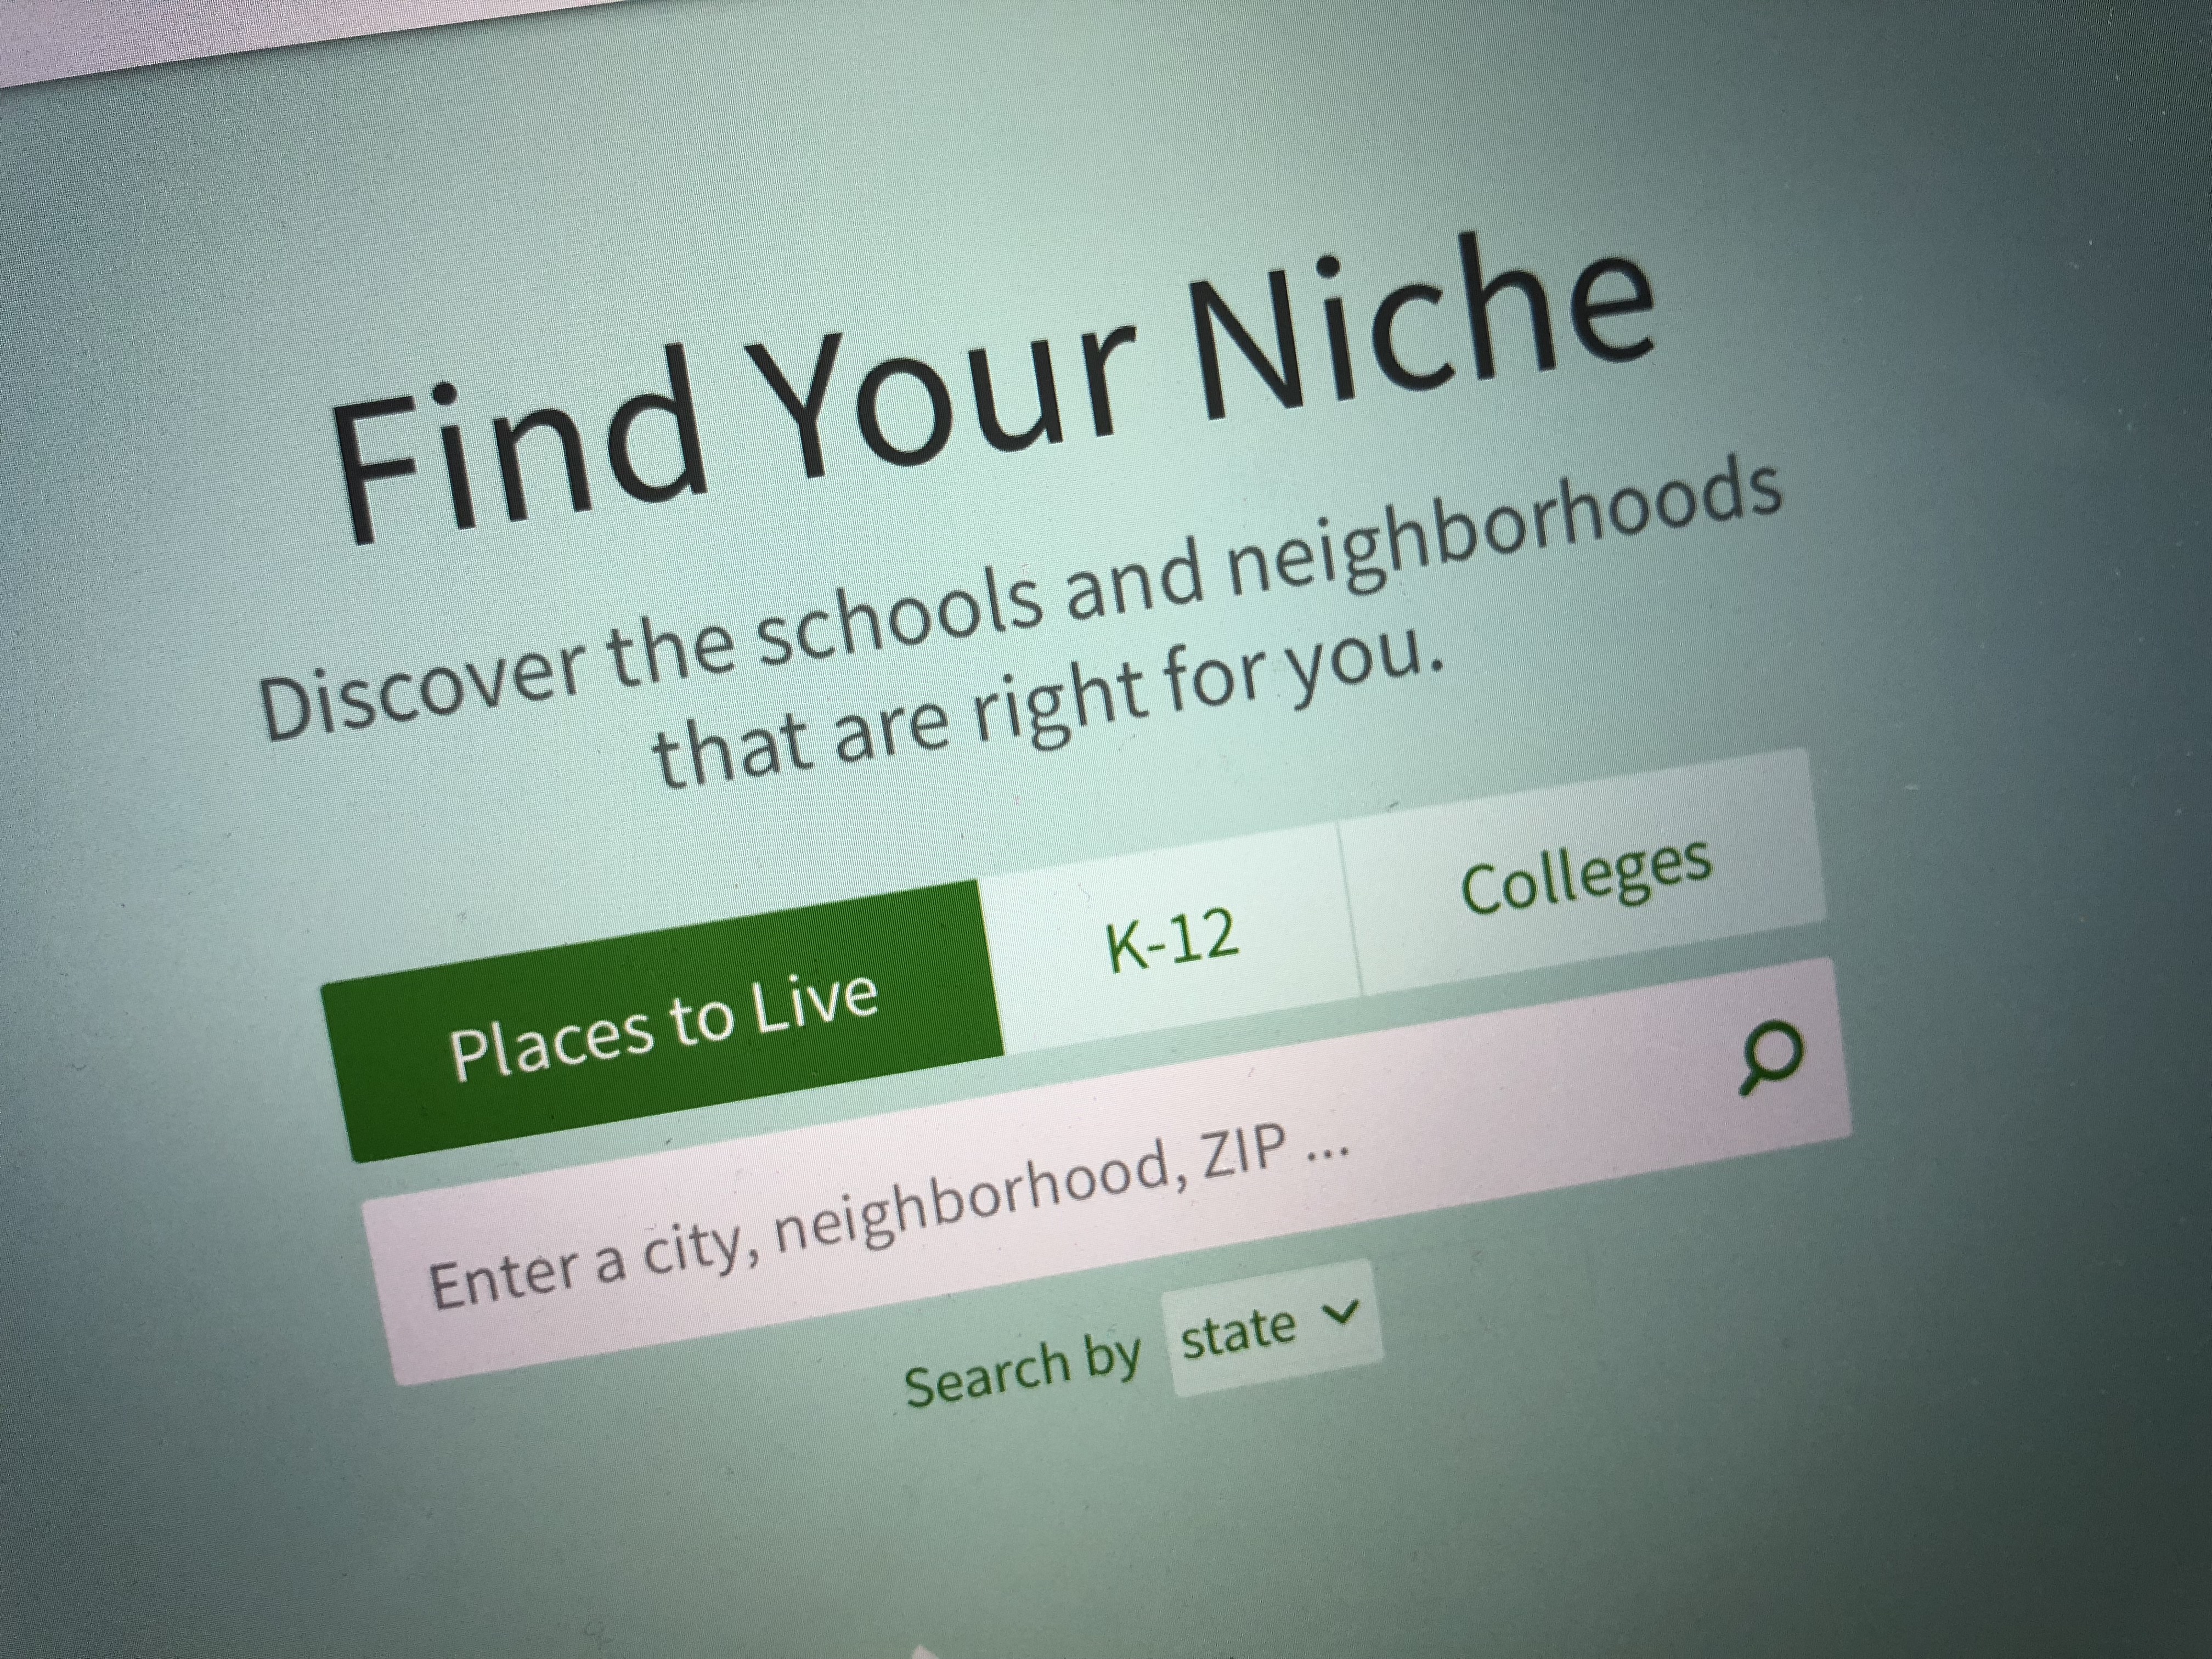 Niche raises $6.6 million to help with your school search